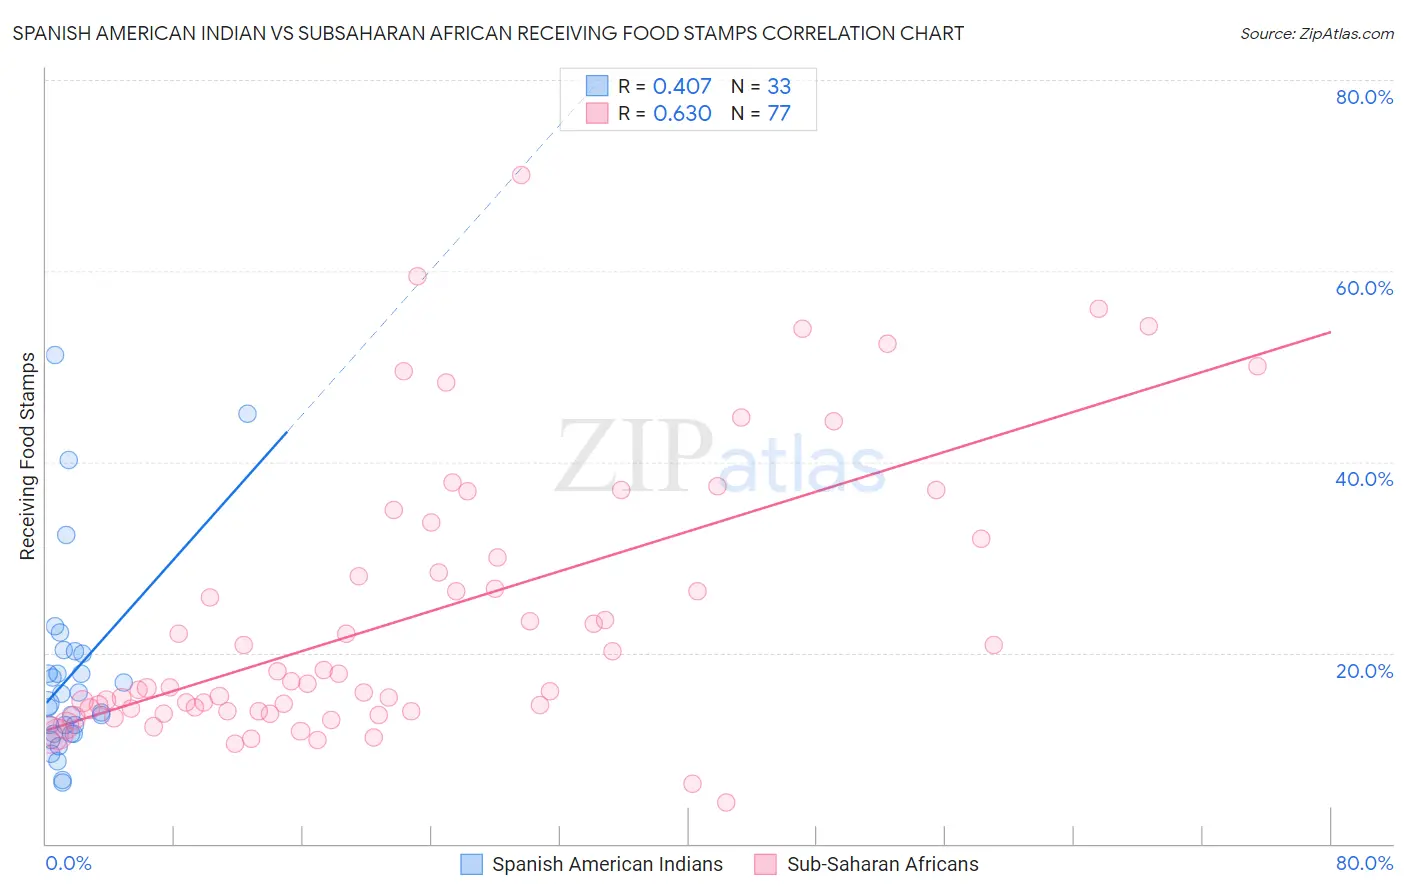 Spanish American Indian vs Subsaharan African Receiving Food Stamps